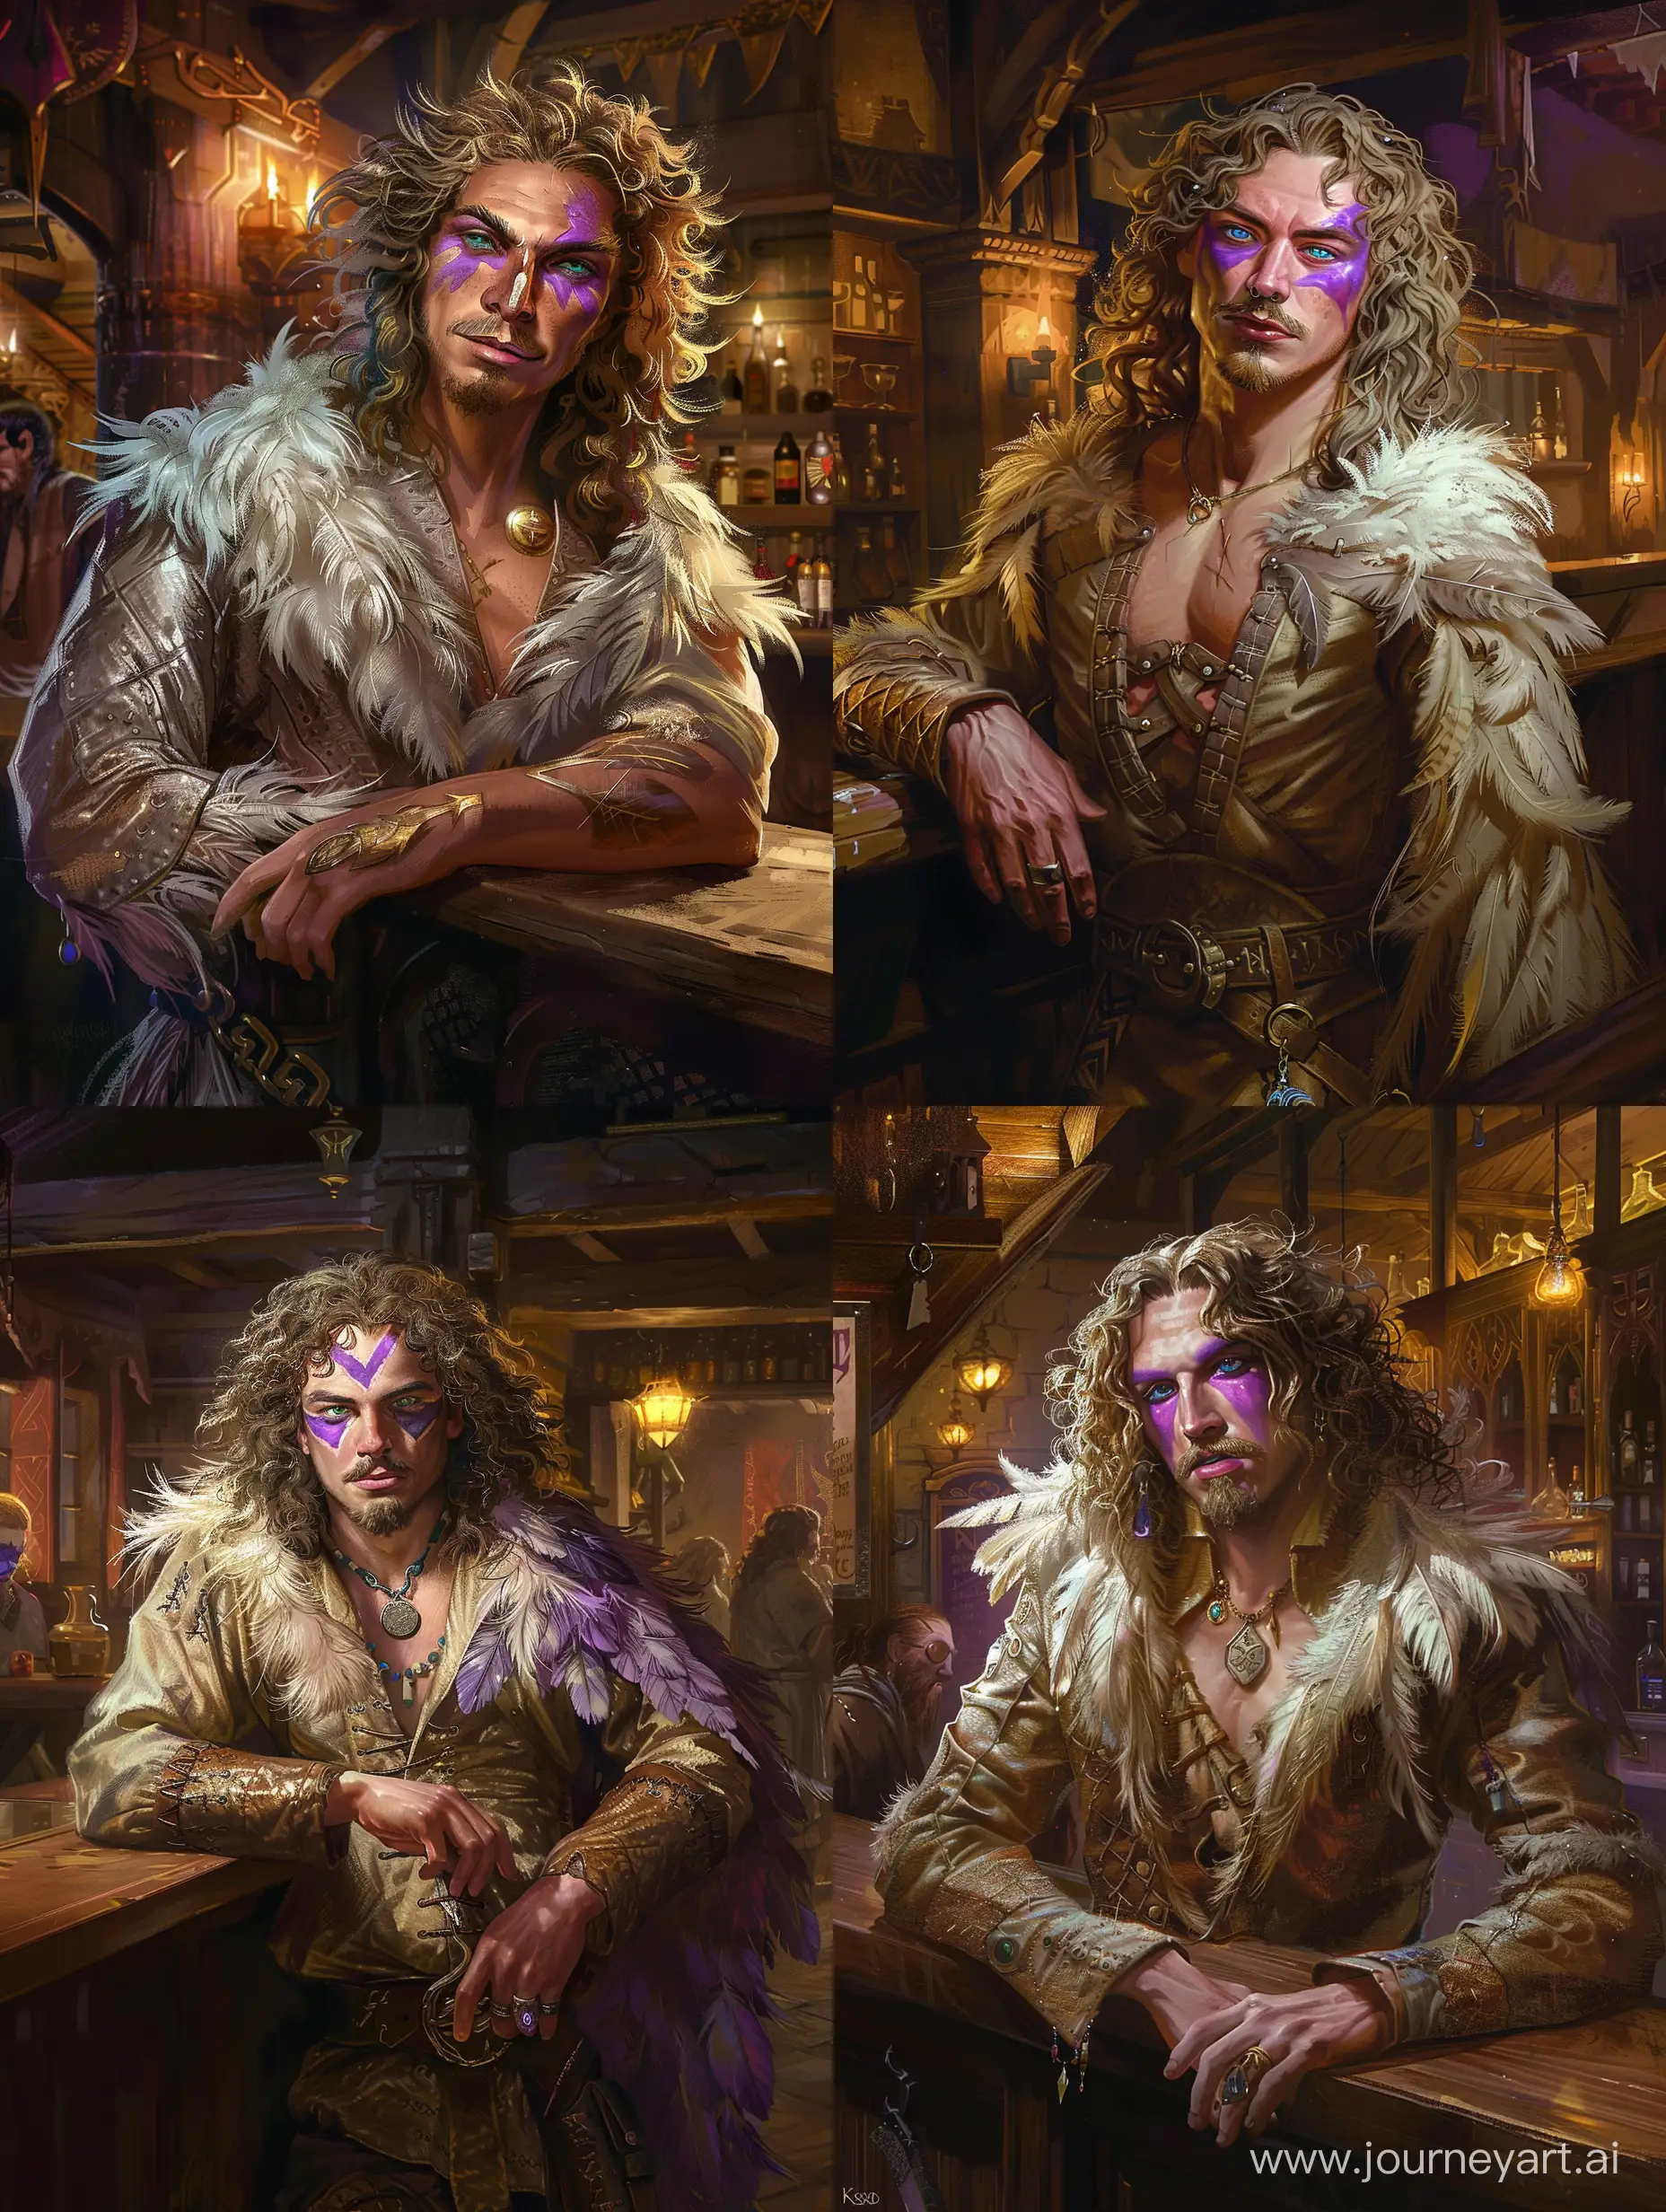 dungeons and dragons character portrait of a human male sorcerer standing in full height full body seen leaning, leaning on the counter, mid fit physique, straight button nose with a bit of wide nasal bridge and upturned little bit wide point, blue-green oval eyes, angled thin lowset eyebrows, short mouth, long loose curly light-brown hair going over shoulders, bristly mustache , slavic look, sarcastic expression, purple KISS inspired facepaint , wearing feathered tevinter like mage robes, medieval tavern at night background, pathfinder character portrait art style